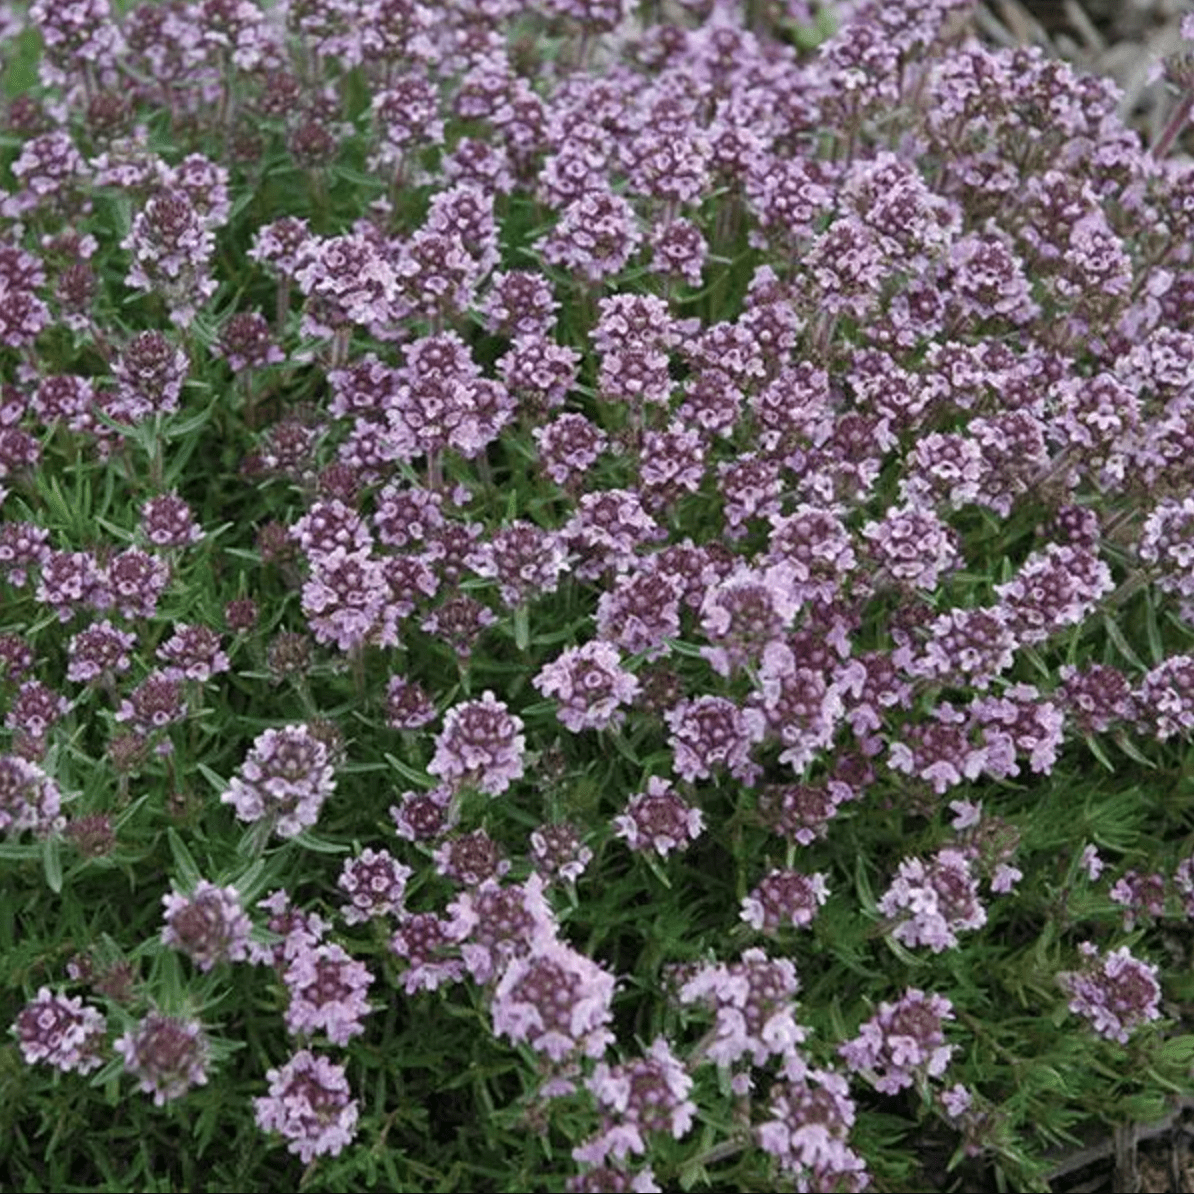 Thyme Plants: Ornamental and Edible Herbs